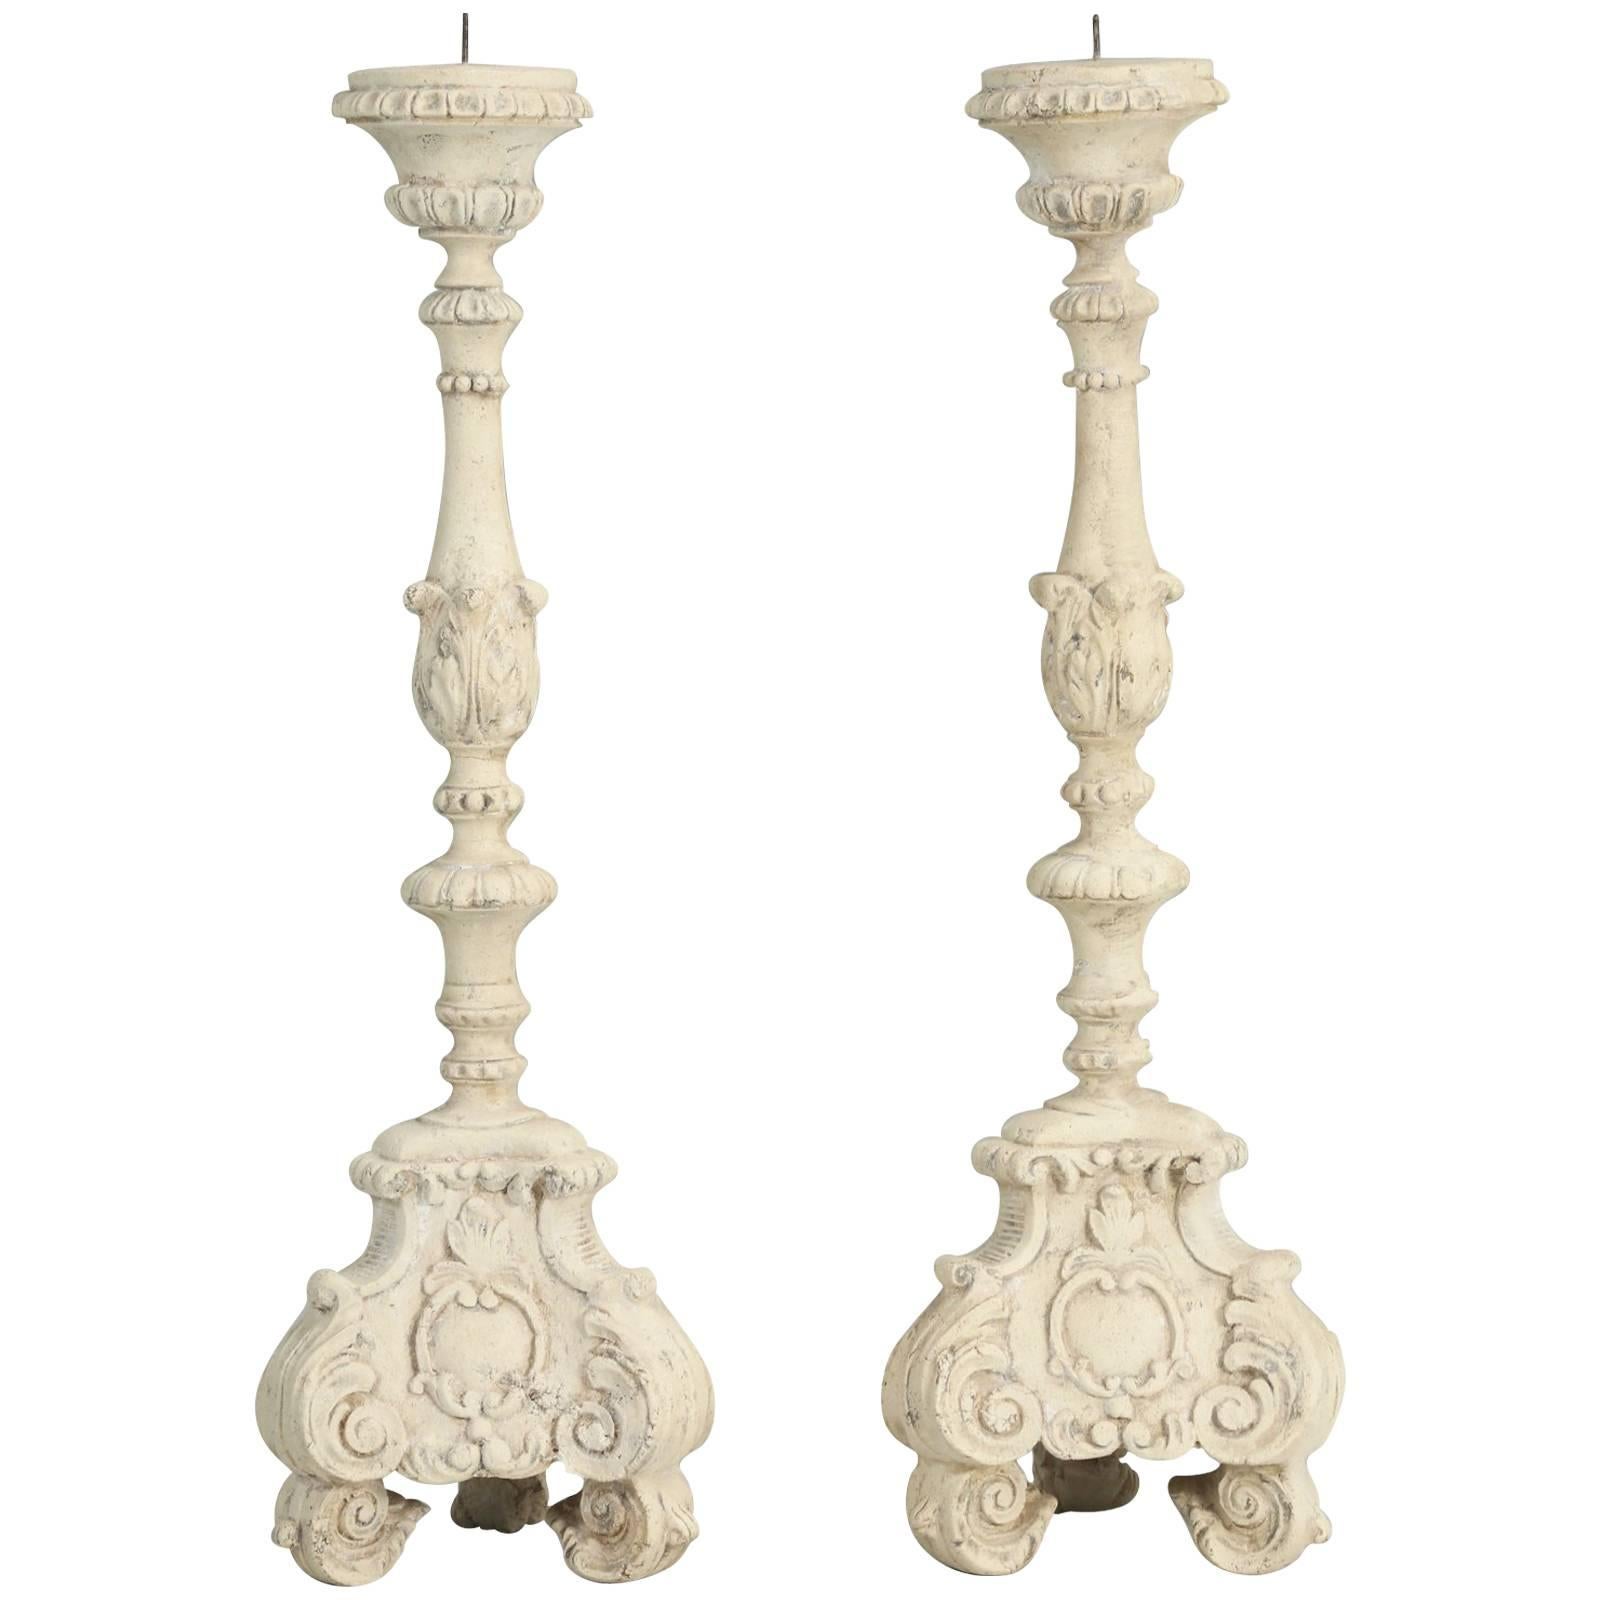 Italian or French Style Reproduction Faux Painted Candlesticks